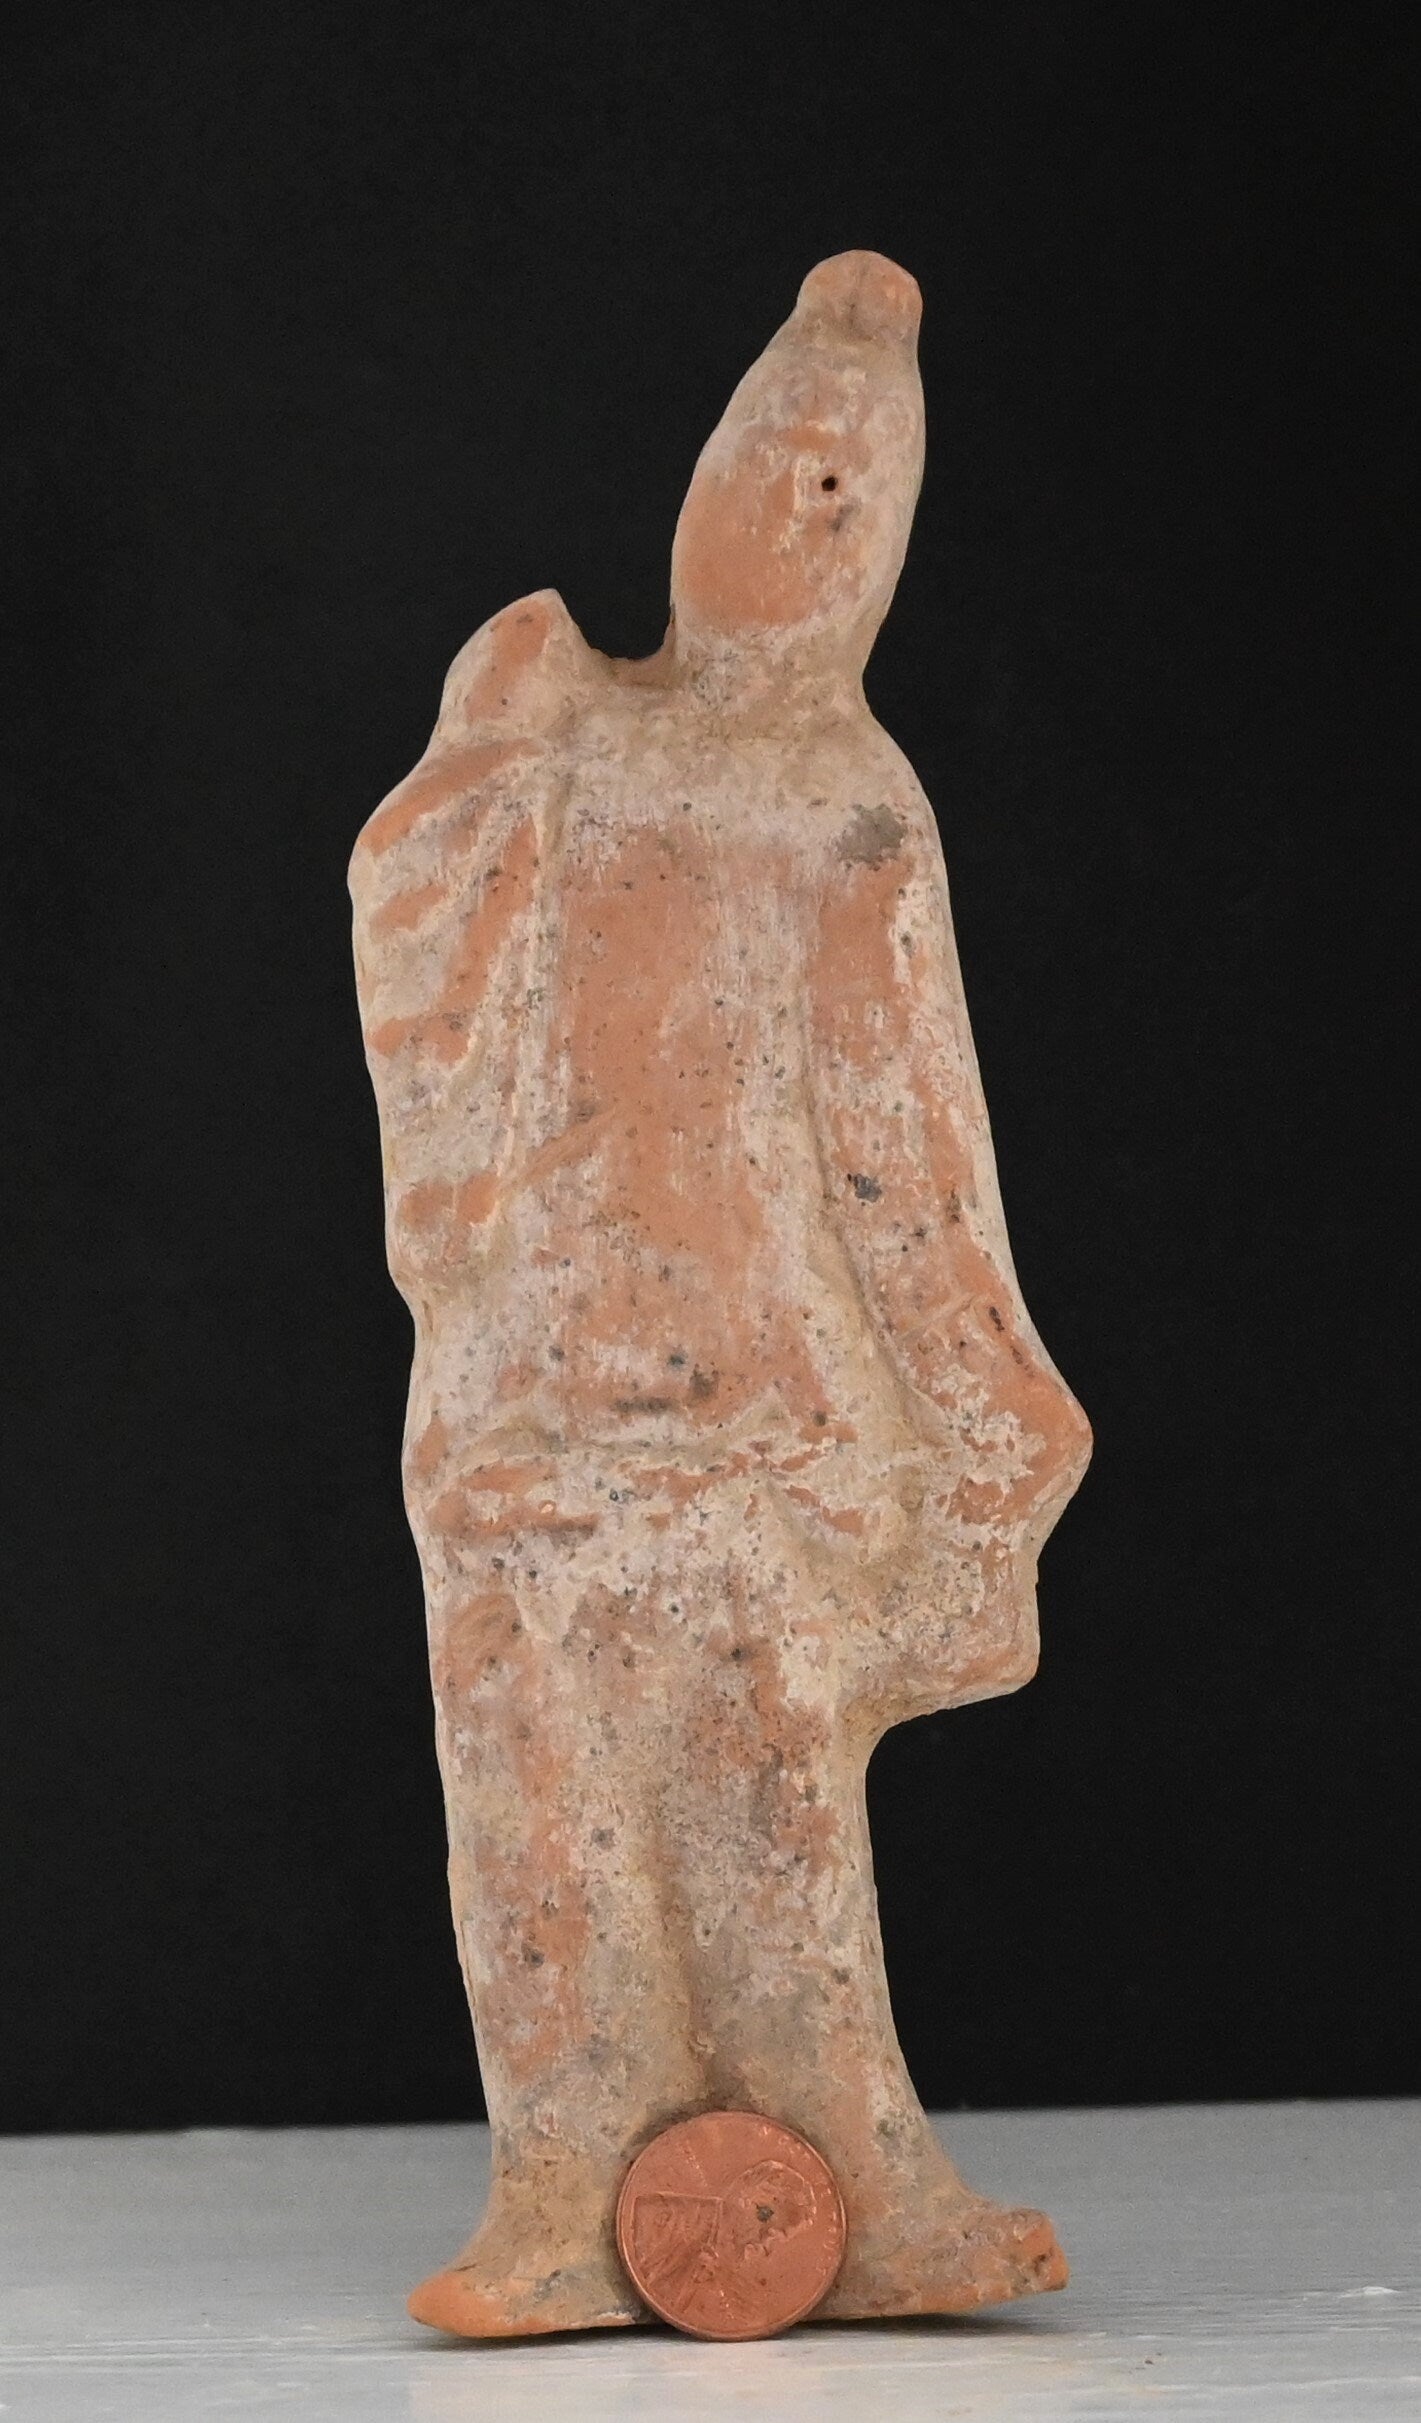 Authentic Han Dynasty, ca. 206 BCE to 220 CE Elegant mold-formed terracotta tomb attendant 7 inches with COA and provenance